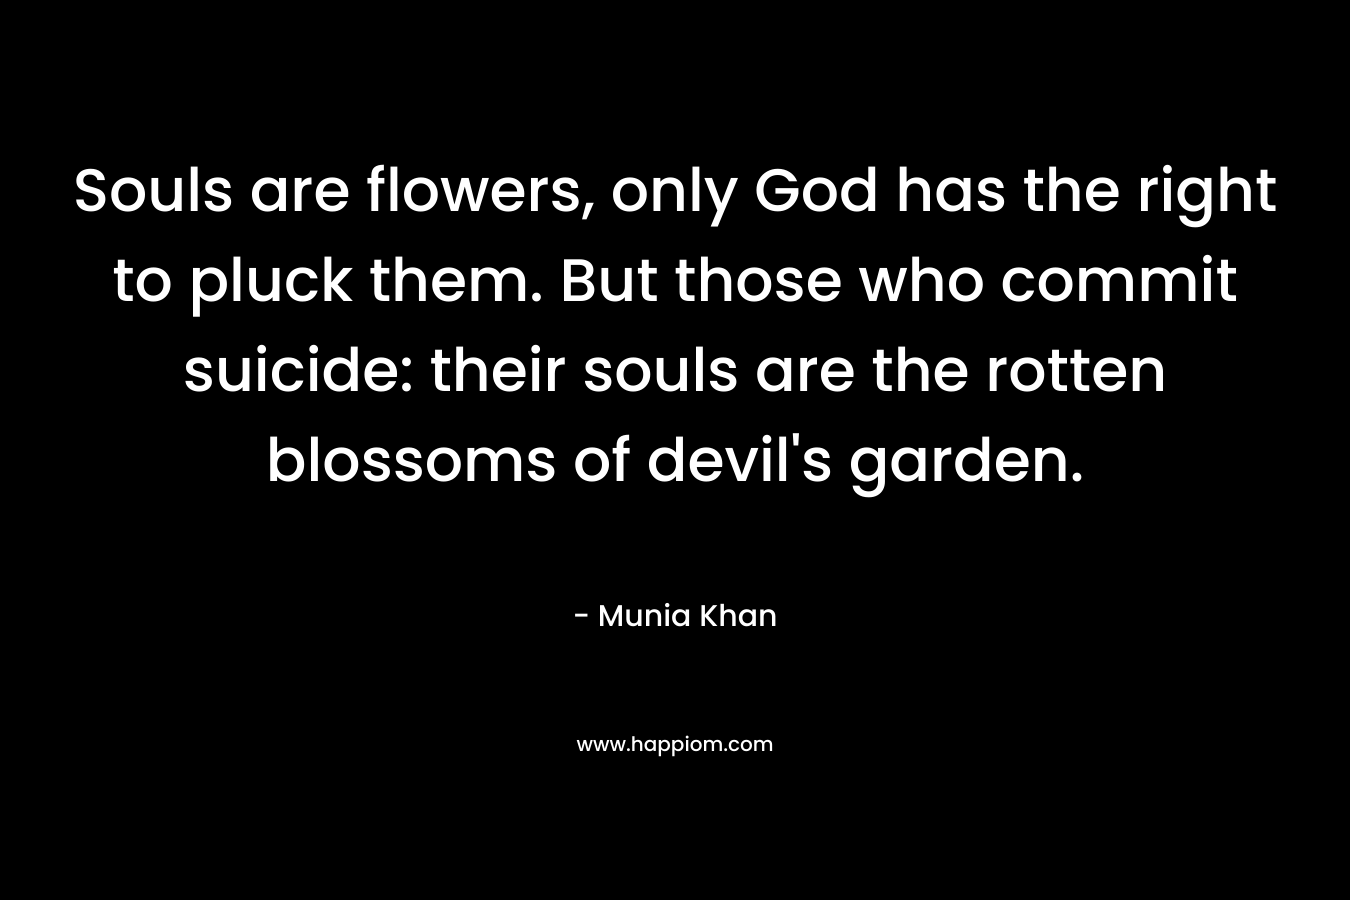 Souls are flowers, only God has the right to pluck them. But those who commit suicide: their souls are the rotten blossoms of devil's garden.